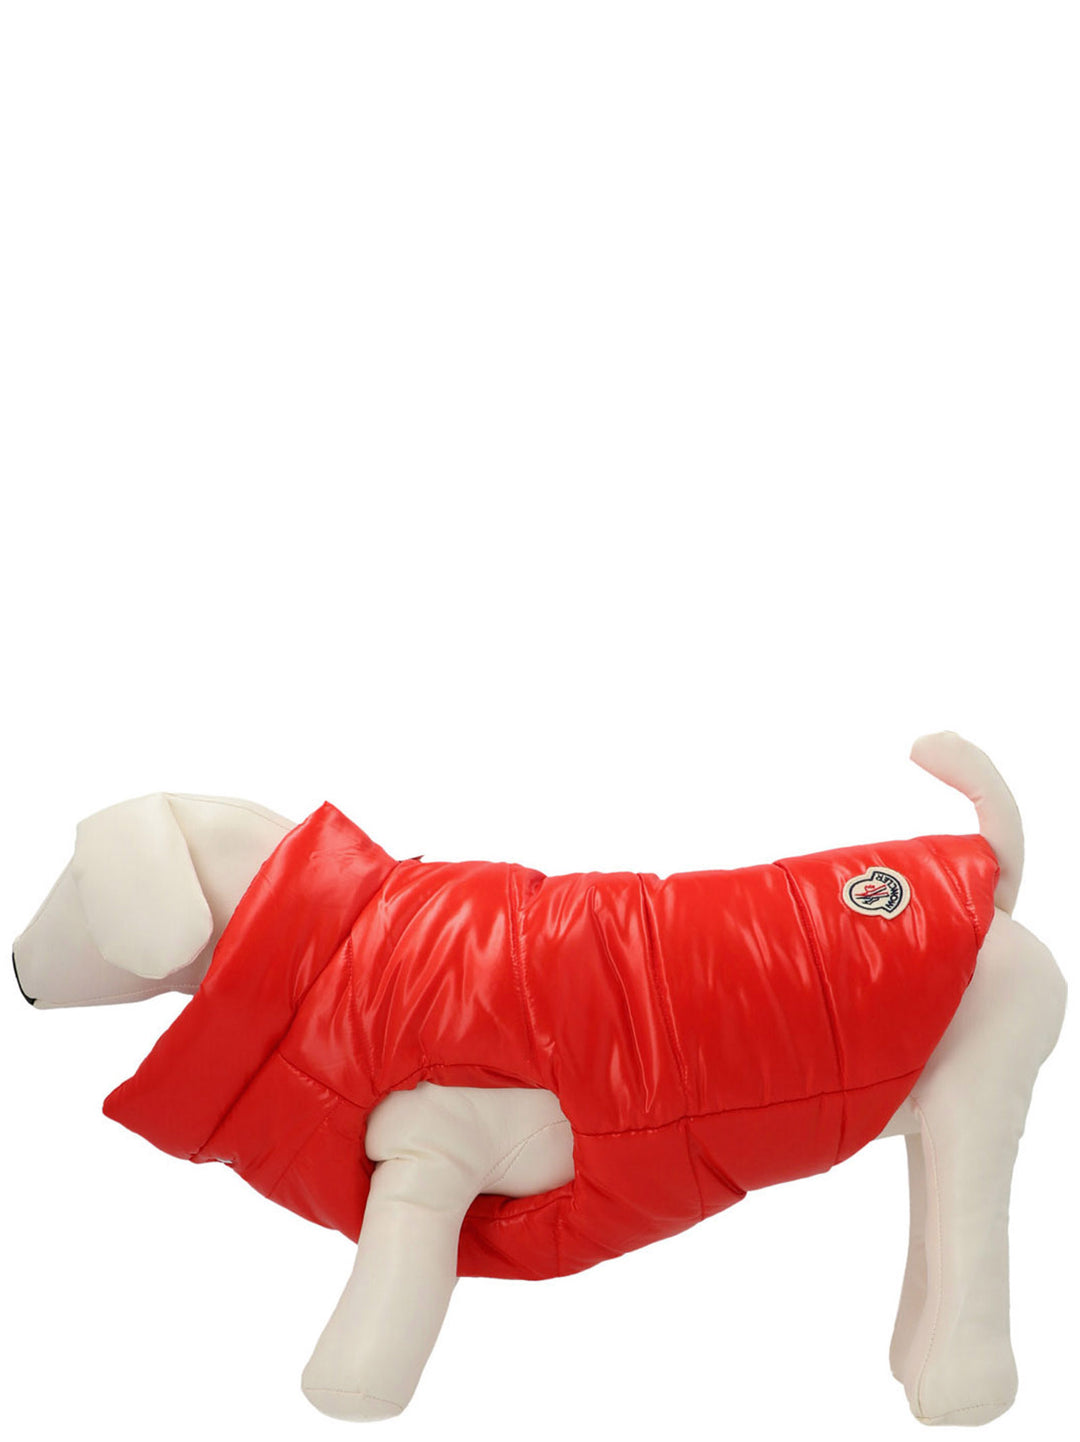 Moncler Genius X Poldo Puffer Jacket Pets Accesories Rosso